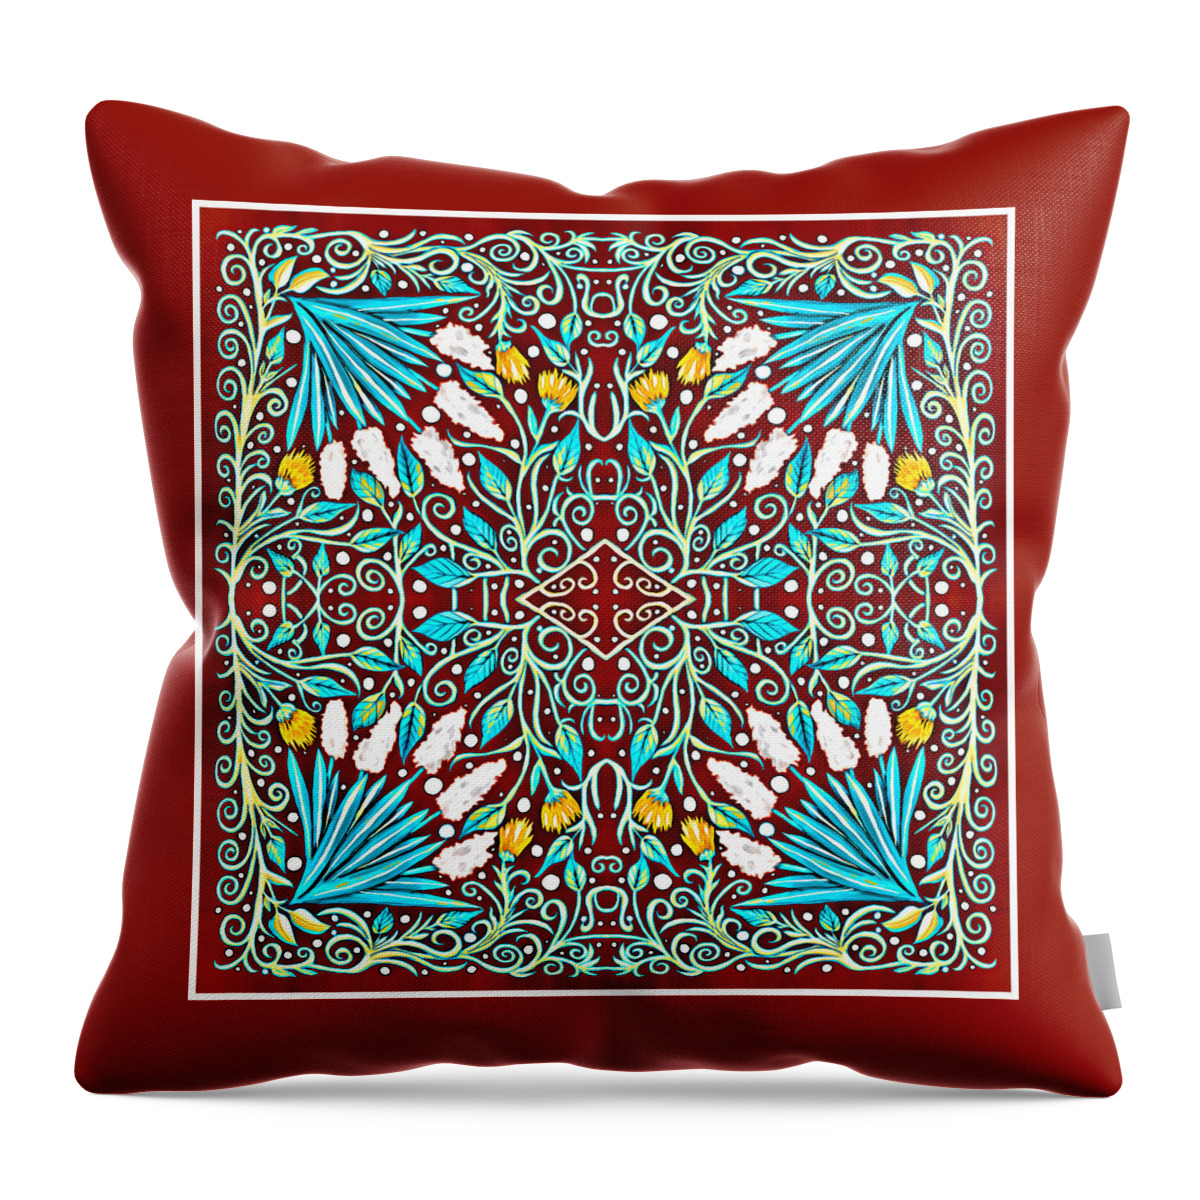 Turquoise Leaves Throw Pillow featuring the mixed media Floral Design in Turquoise, Yellow and Red by Lise Winne